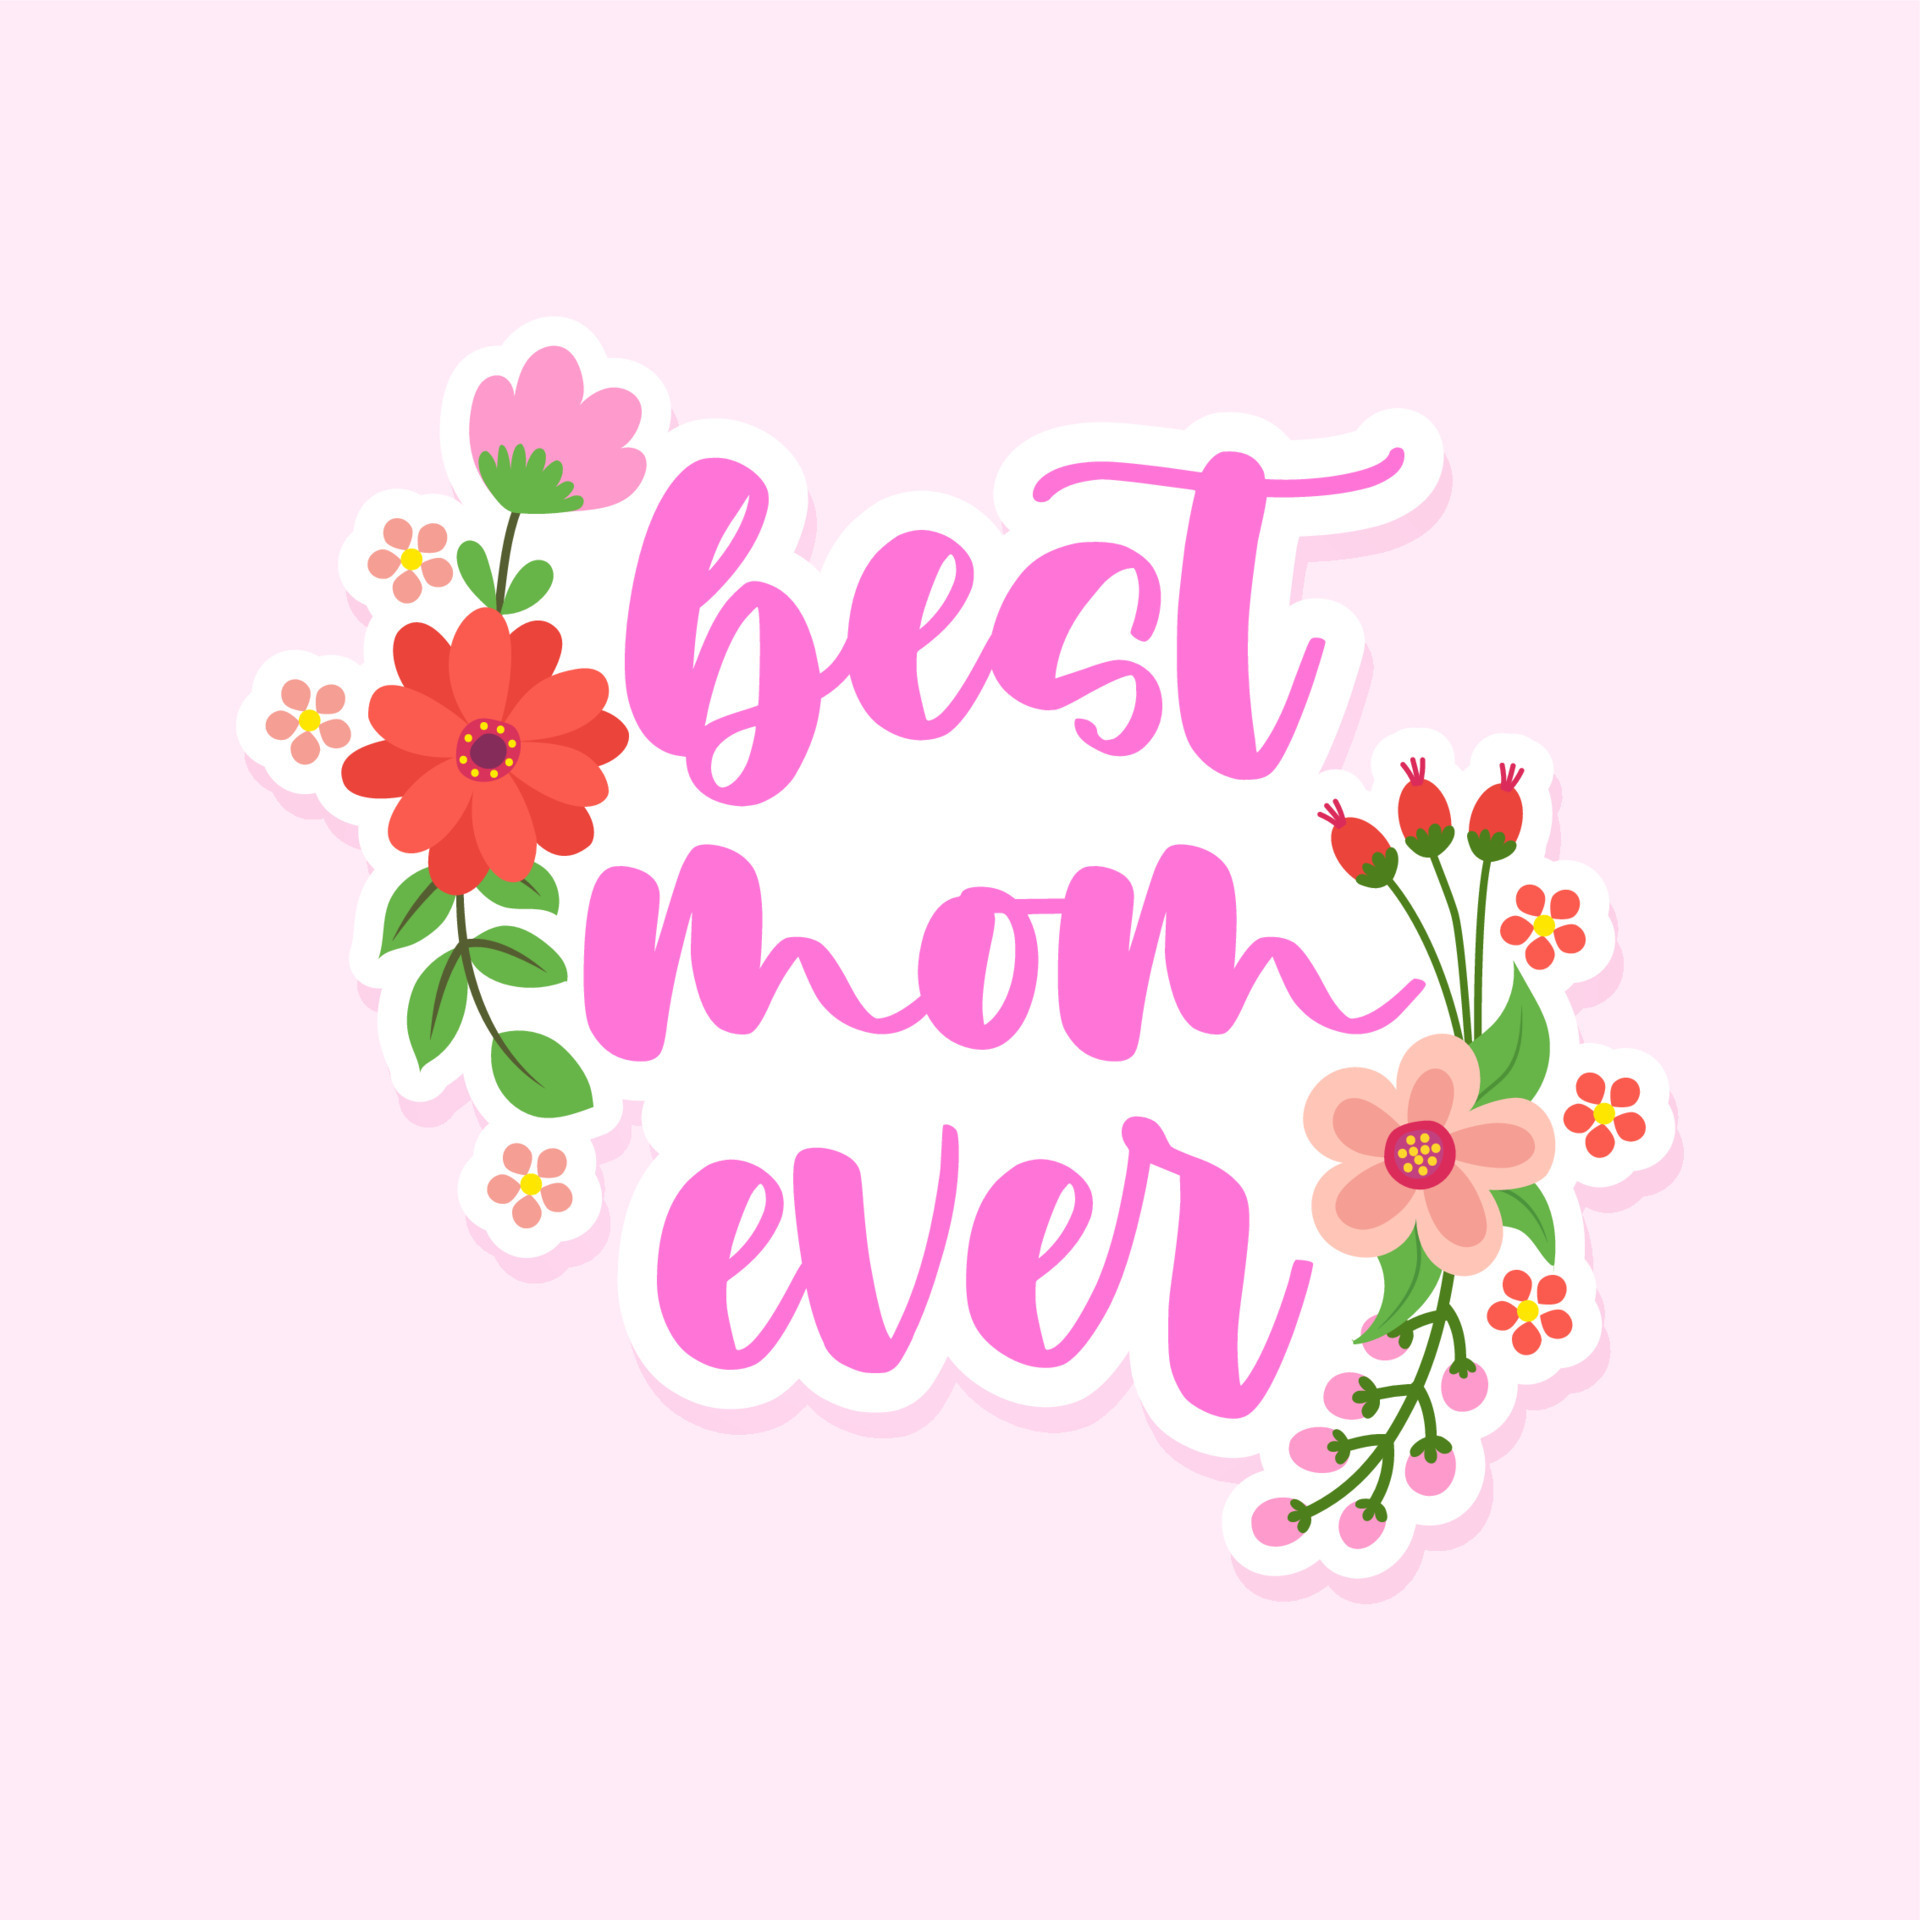 https://static.vecteezy.com/system/resources/previews/007/307/174/original/best-mom-ever-happy-mothers-day-lettering-handmade-calligraphy-illustration-mother-s-day-card-with-crown-good-for-t-shirt-mug-scrap-booking-posters-textiles-gifts-vector.jpg